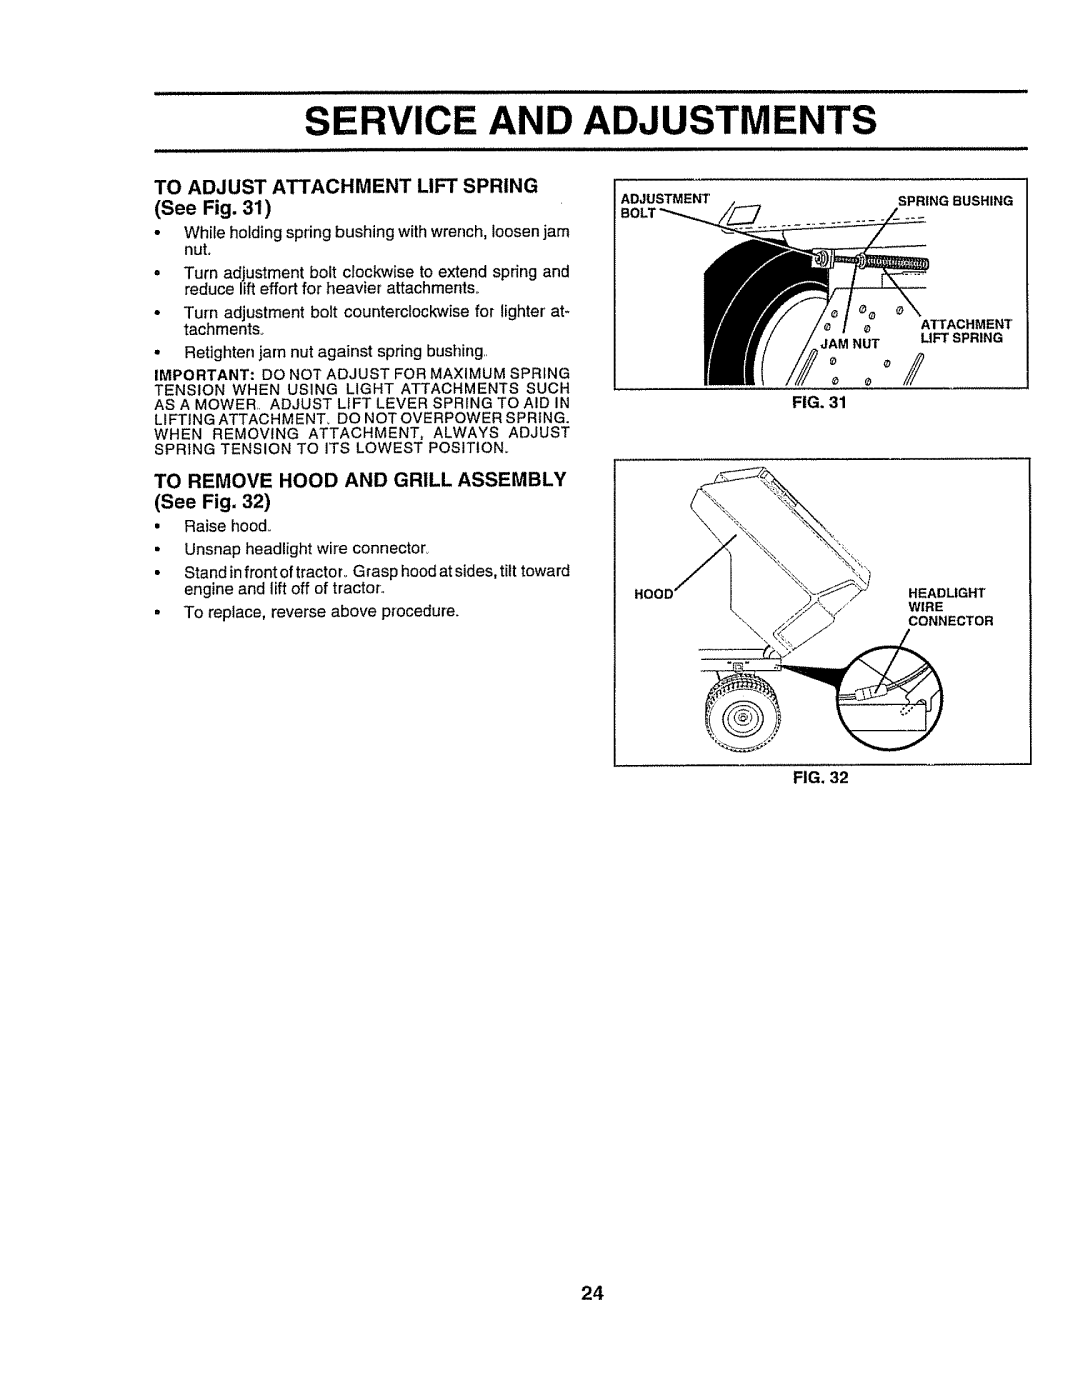 Craftsman 917O251550 owner manual Service And Adjustments, To Adjust Attachment, Lift Spring, See Fig 